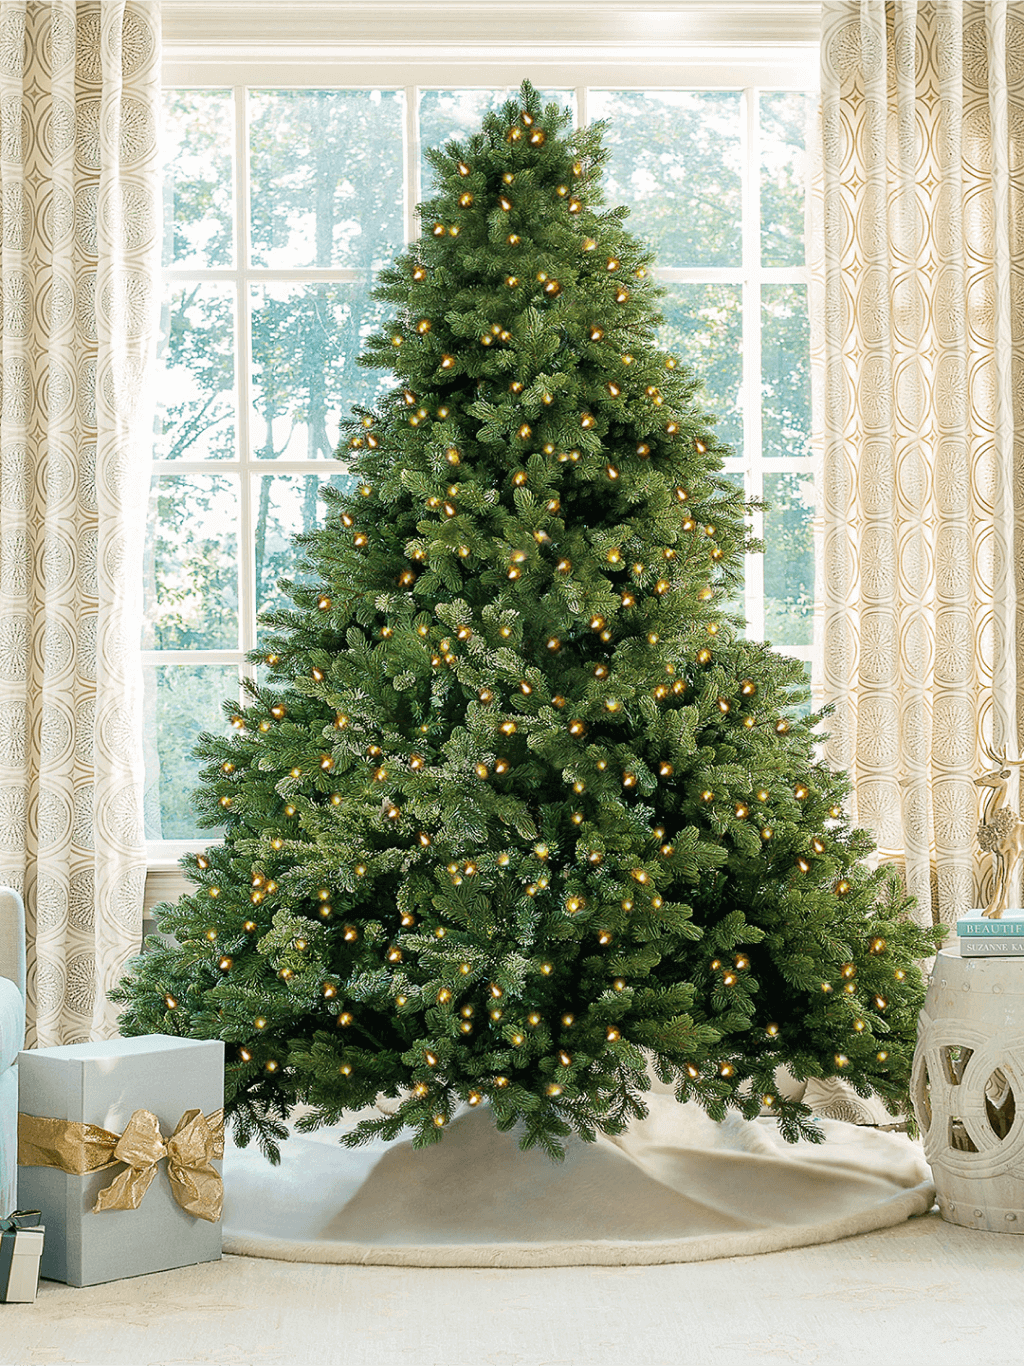 King of Christmas 6.5' Cypress Spruce Artificial Christmas Tree with 1000 Warm White & Multi-Color LED Lights